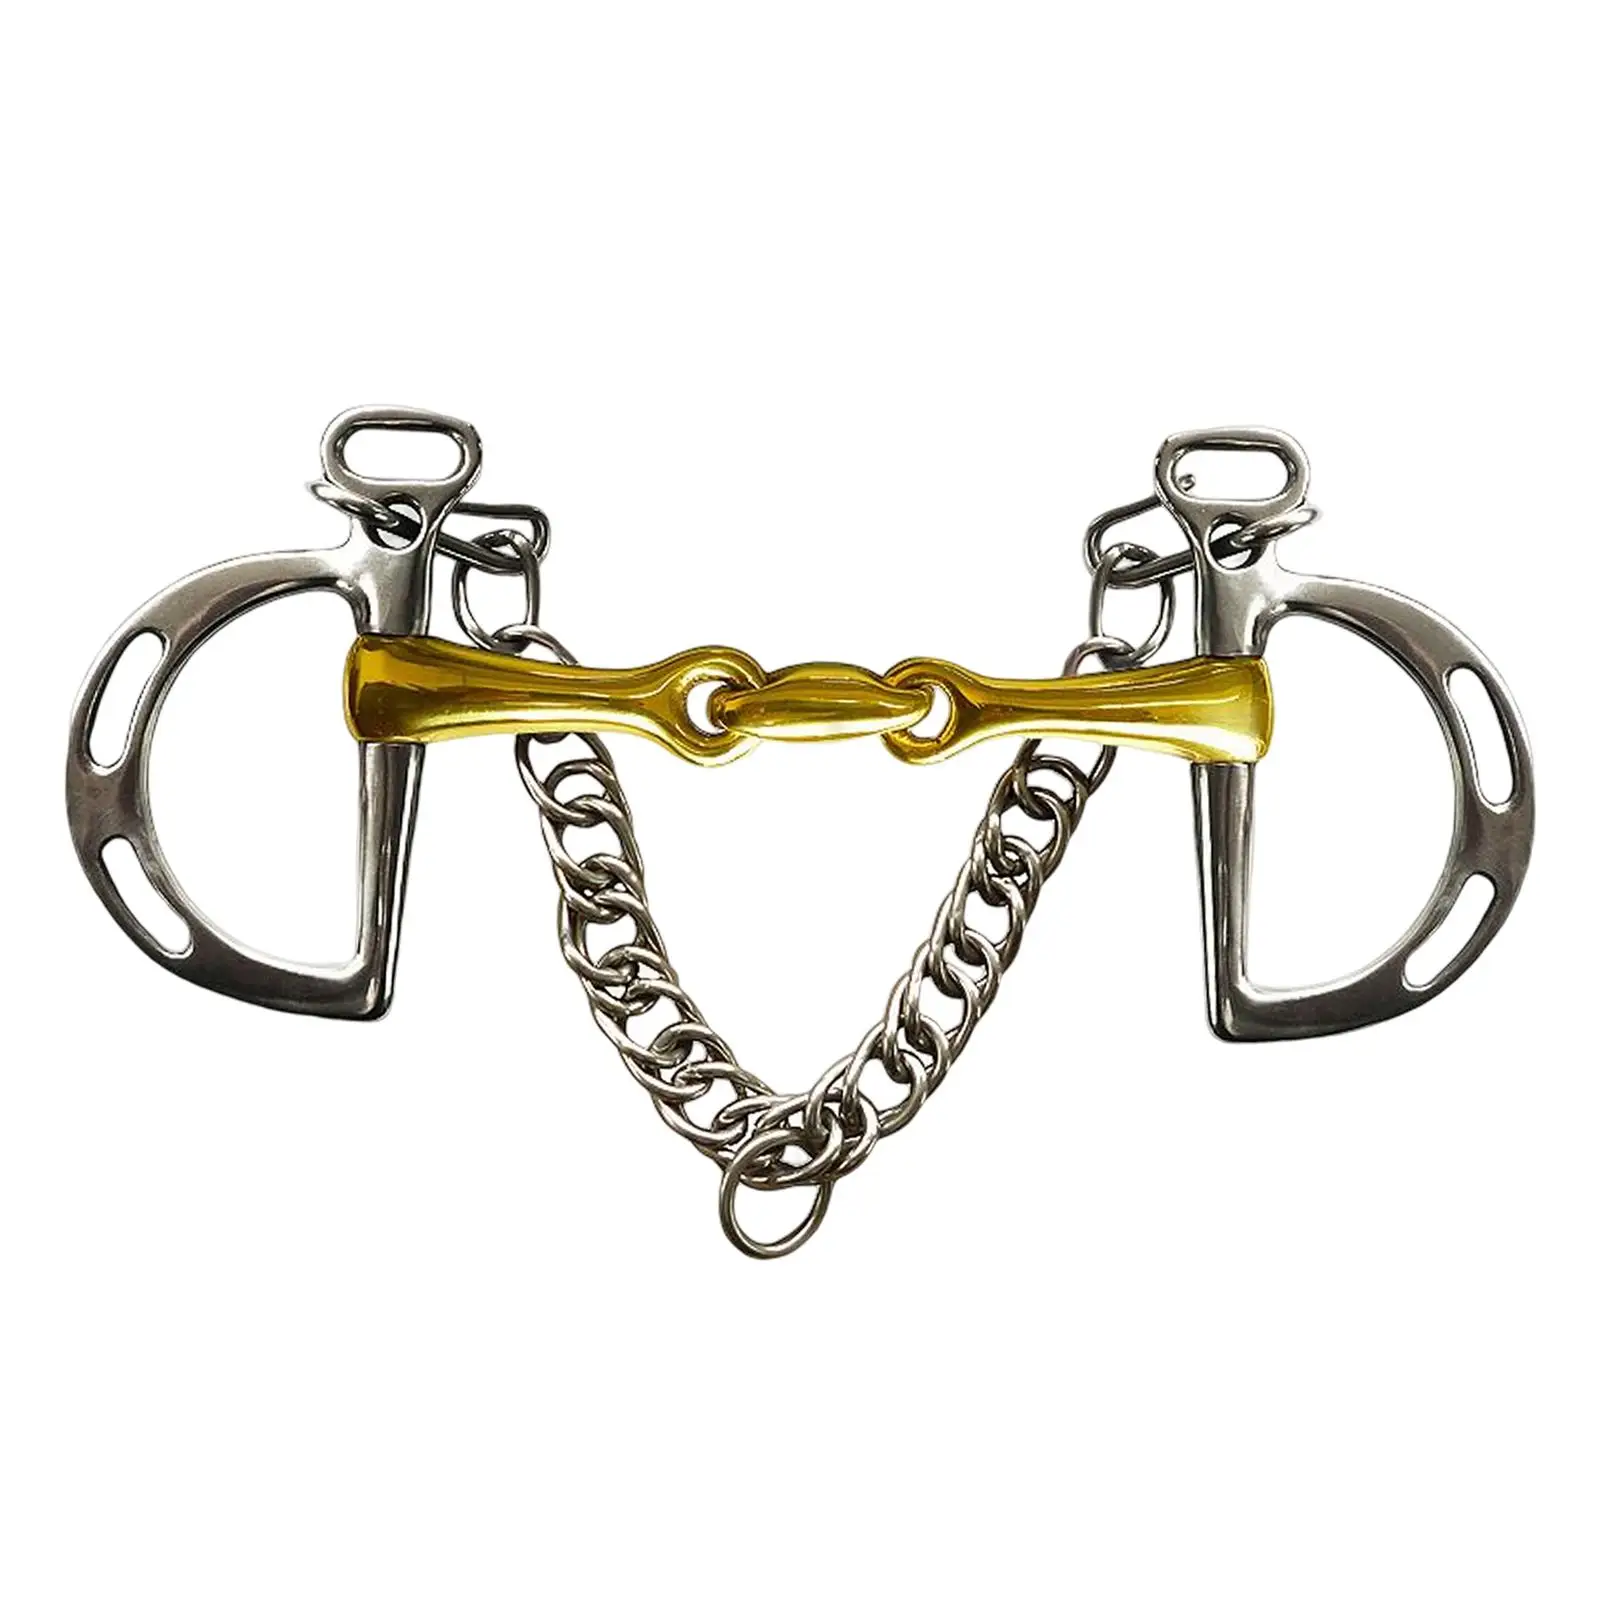 horse Bit Copper Mouth Center Roller with Silver Trims Cheek Harness for Horse Bridle Equestrian Training Equipment